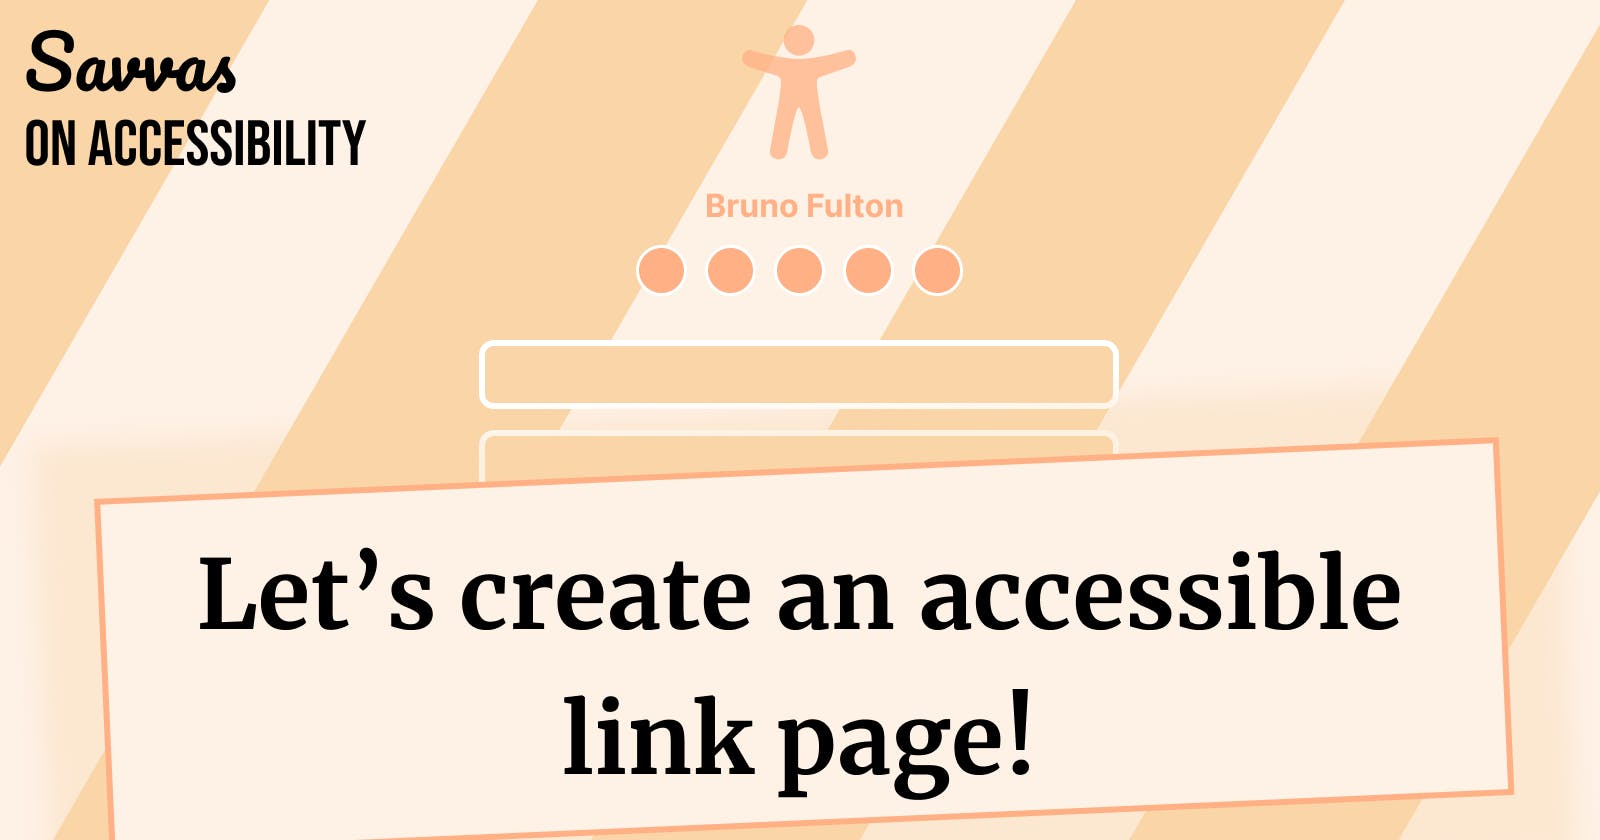 Let’s create an accessible link page!